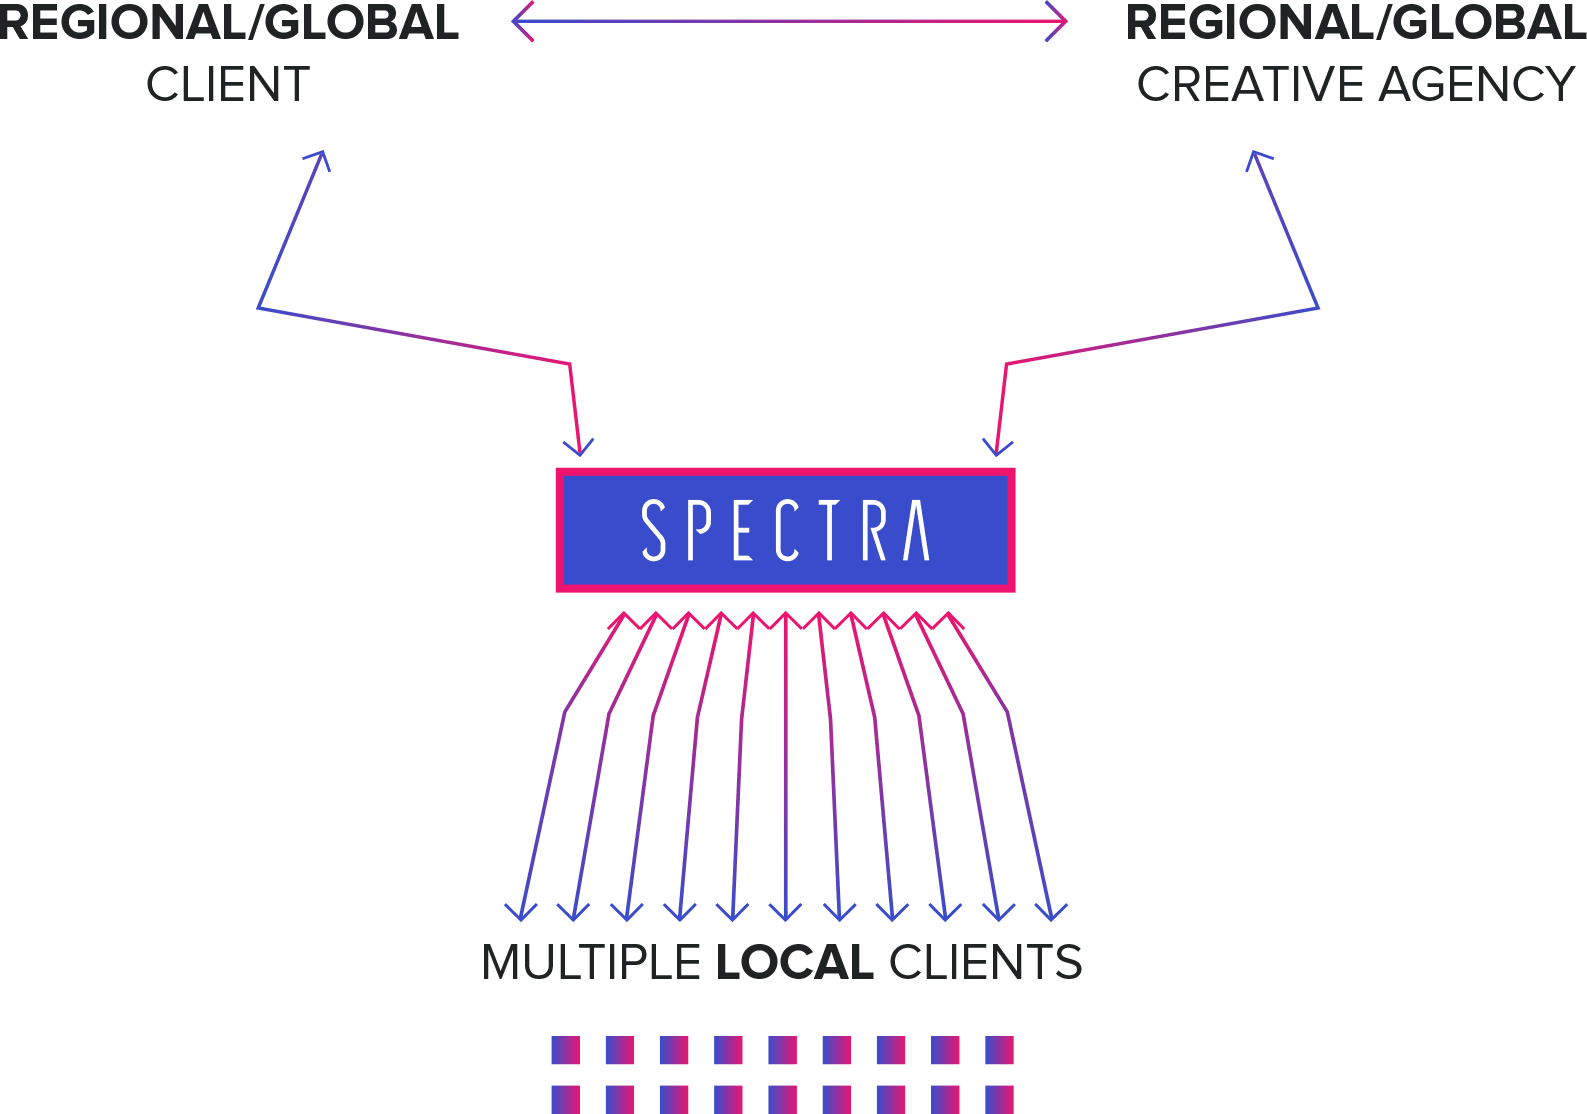 Working with Spectra